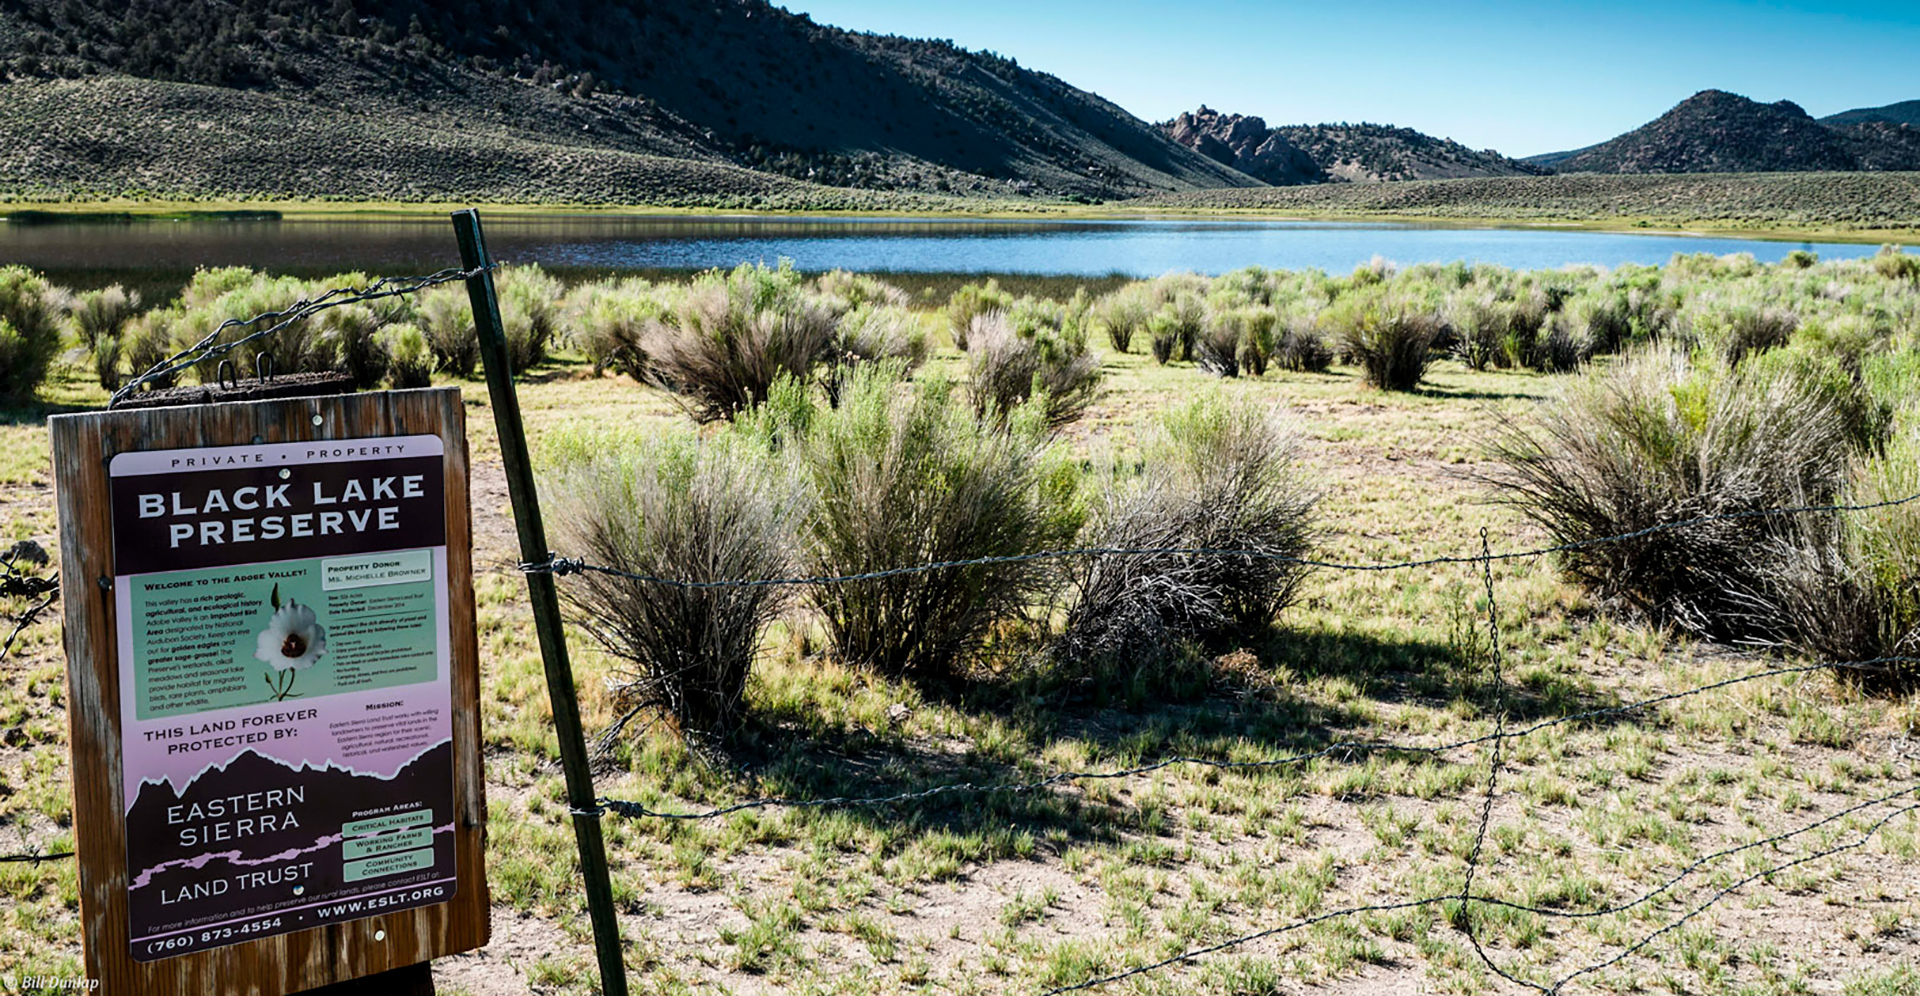 black rock lake in the eastern sierra, sage and a sign in foreground